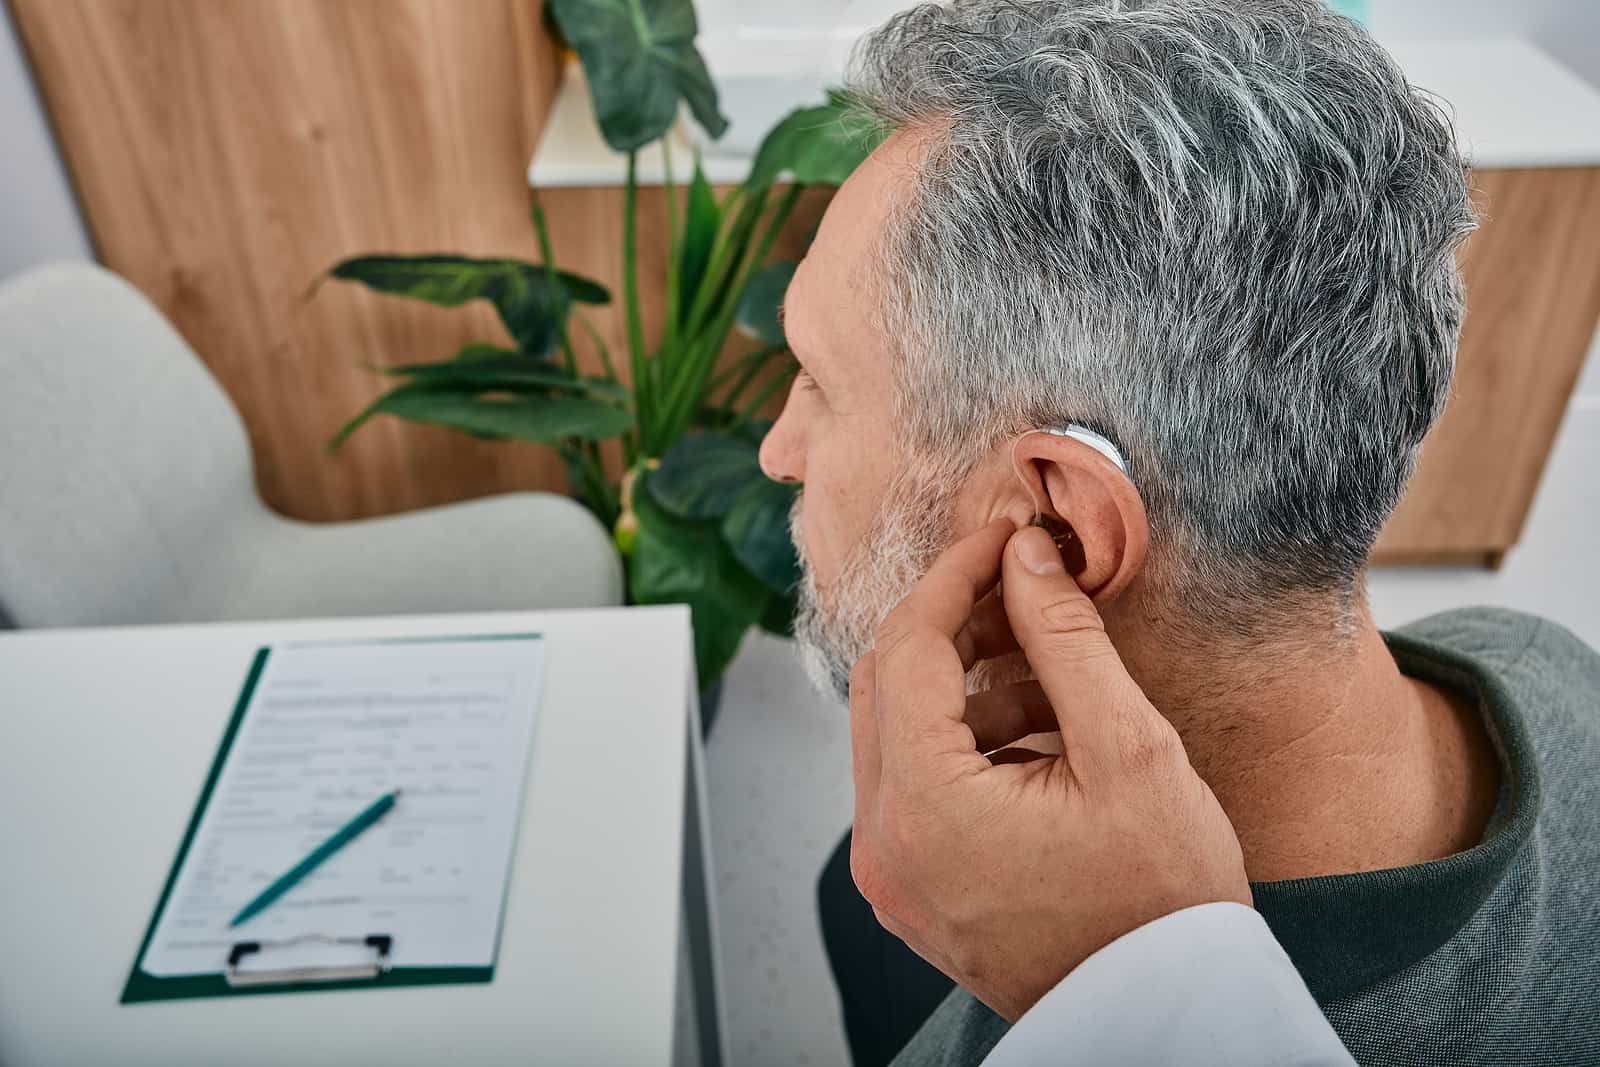 Audiologist Fits A Hearing Aid On Deafness Mature Man Ear While